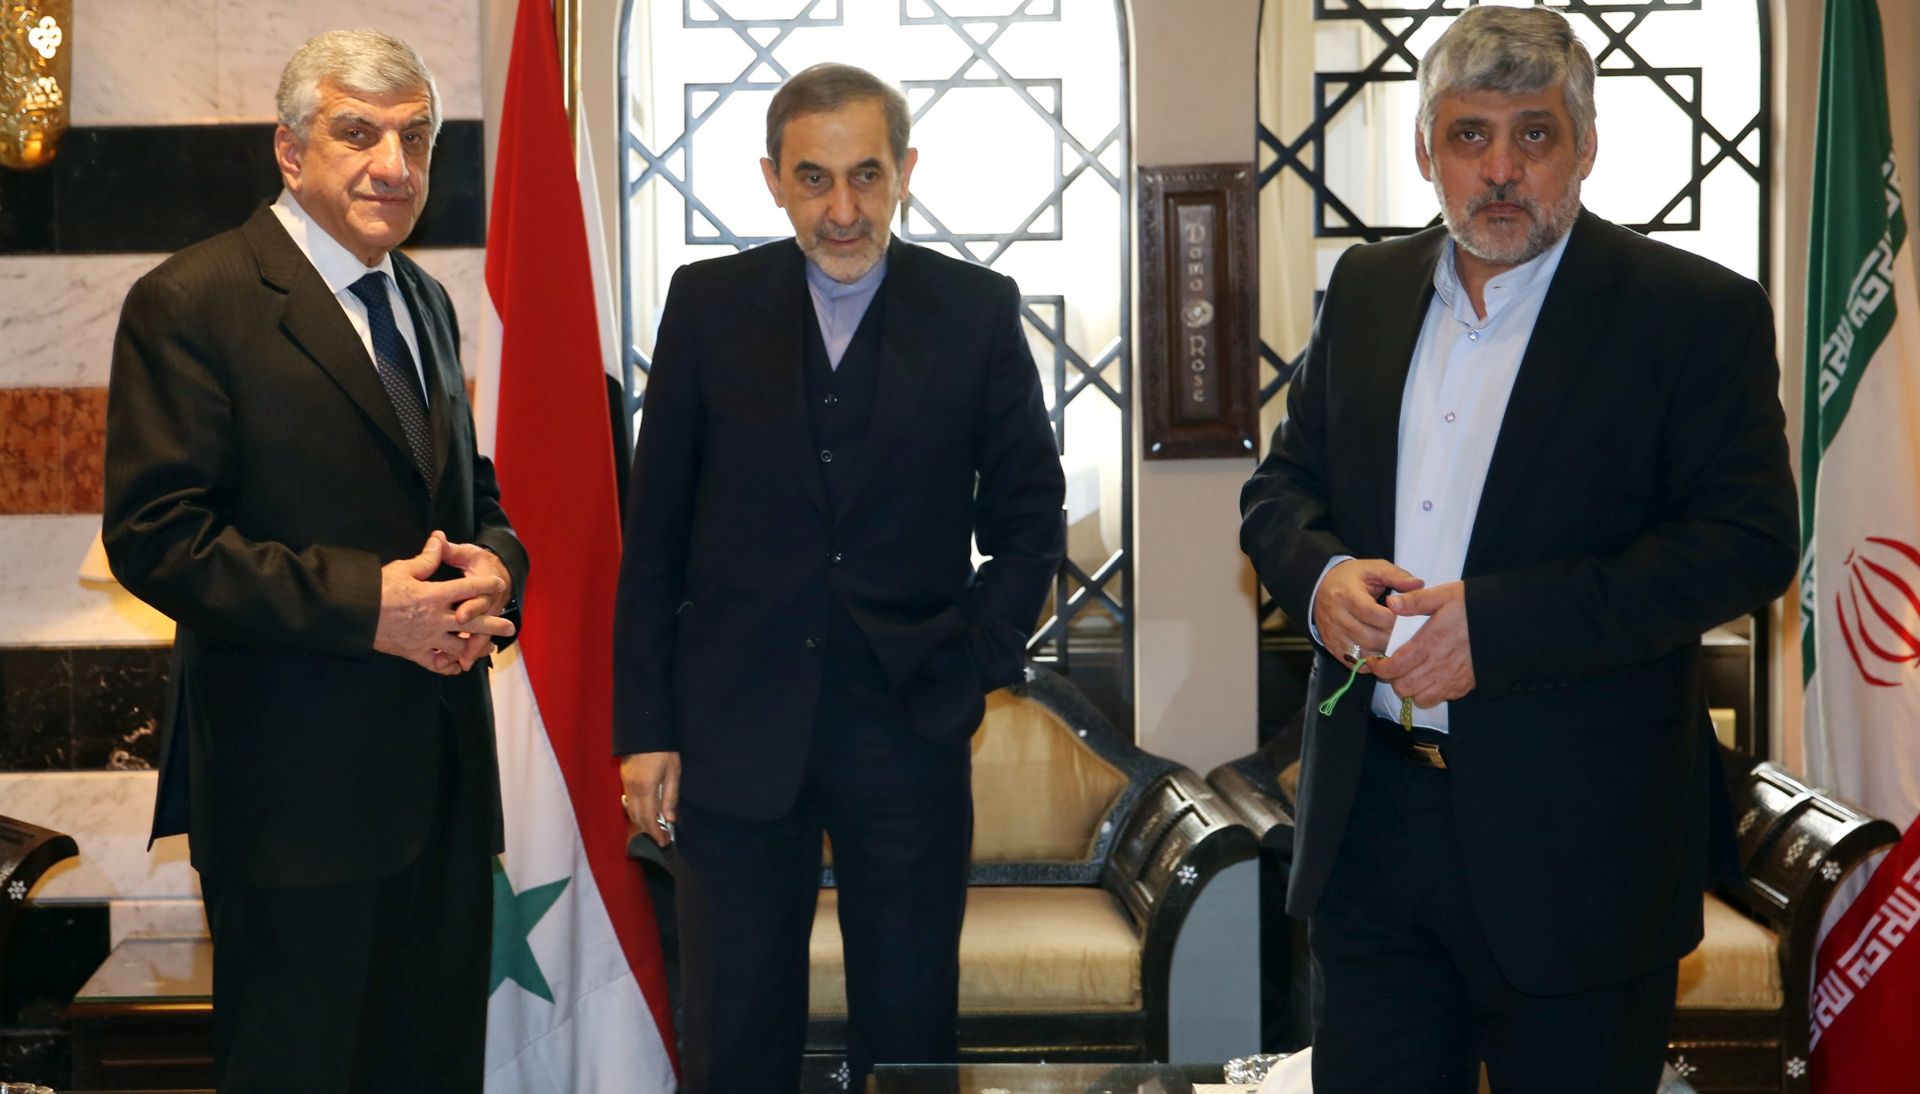 epa05046826 Ali Akbar Velayati (C), a top adviser to Iran's supreme leader Ayatollah Ali Khamenei, Iranian Ambassador to Syria Riza Shebani (R), and Syrian Deputy Foreign Minister Hamed al-Hassan (L) meet at Velayati’s residence following the latter’s meeting with Syrian President Bashar Assad in Damascus, Syria, 29 November 2015. Velayati flew in earlier the day for talks with Syrian officials on the crisis in Syria and recent developments in the region.  EPA/YOUSSEF BADAWI